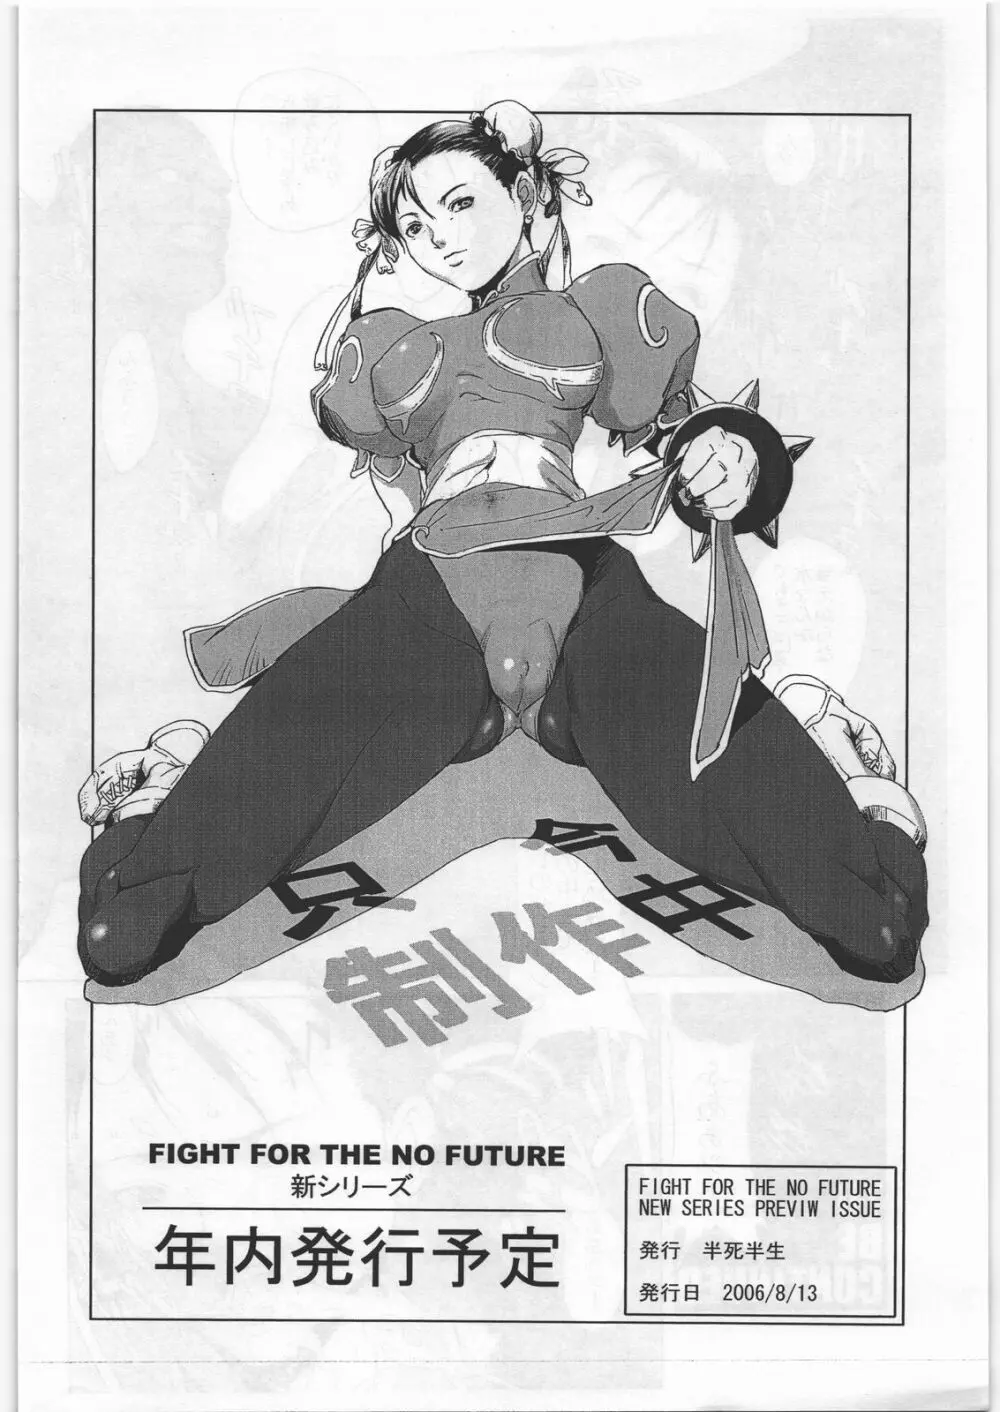 FIGHT FOR THE NO FUTURE NEW SERIES PREVIEW 9ページ